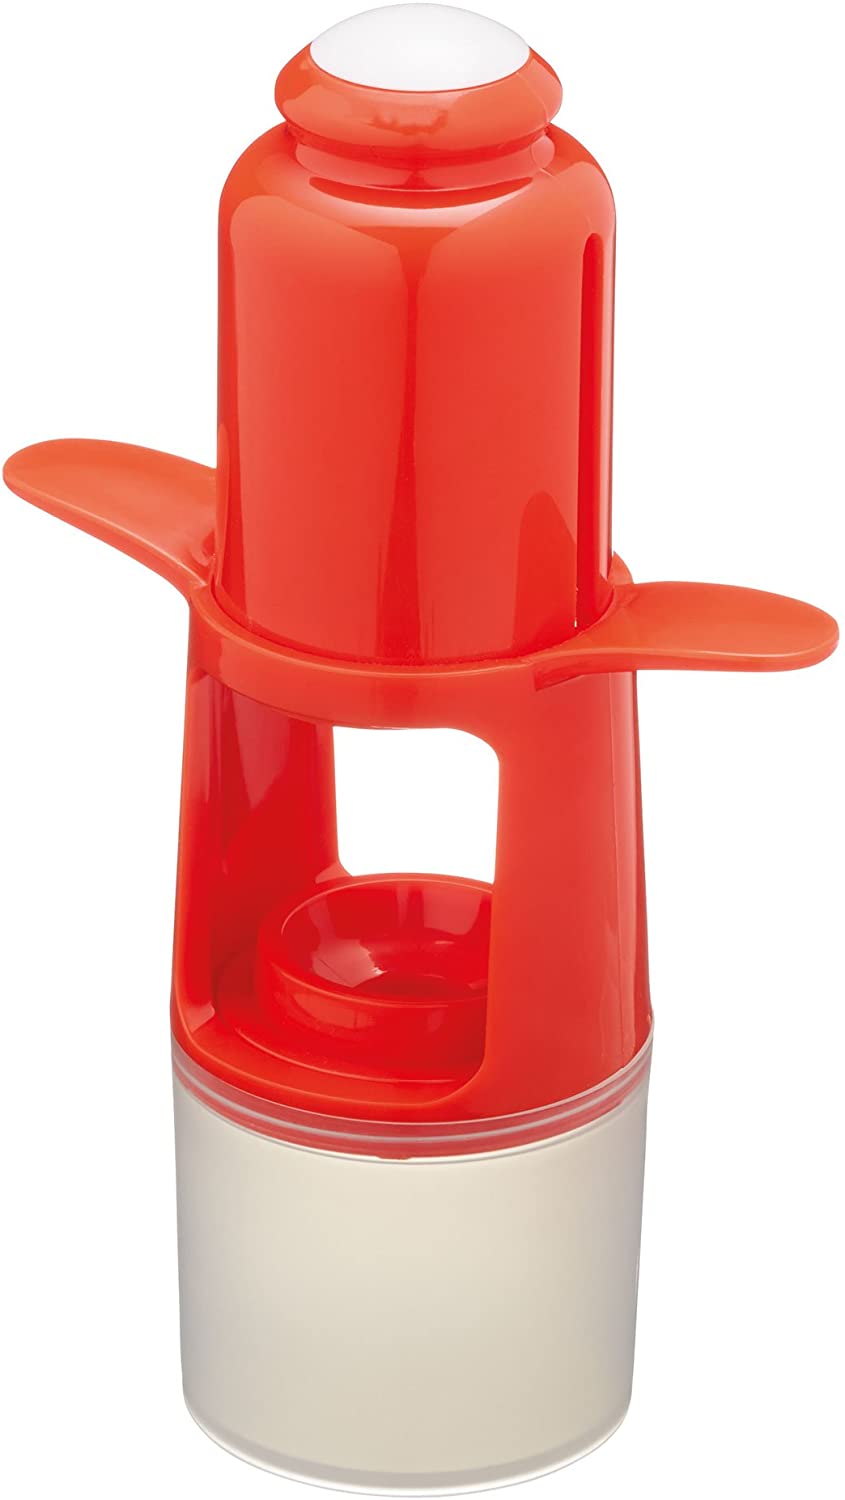 Kitchencraft Healthy Eating Press Cherry Pitter/Olive Stoner, White/Red